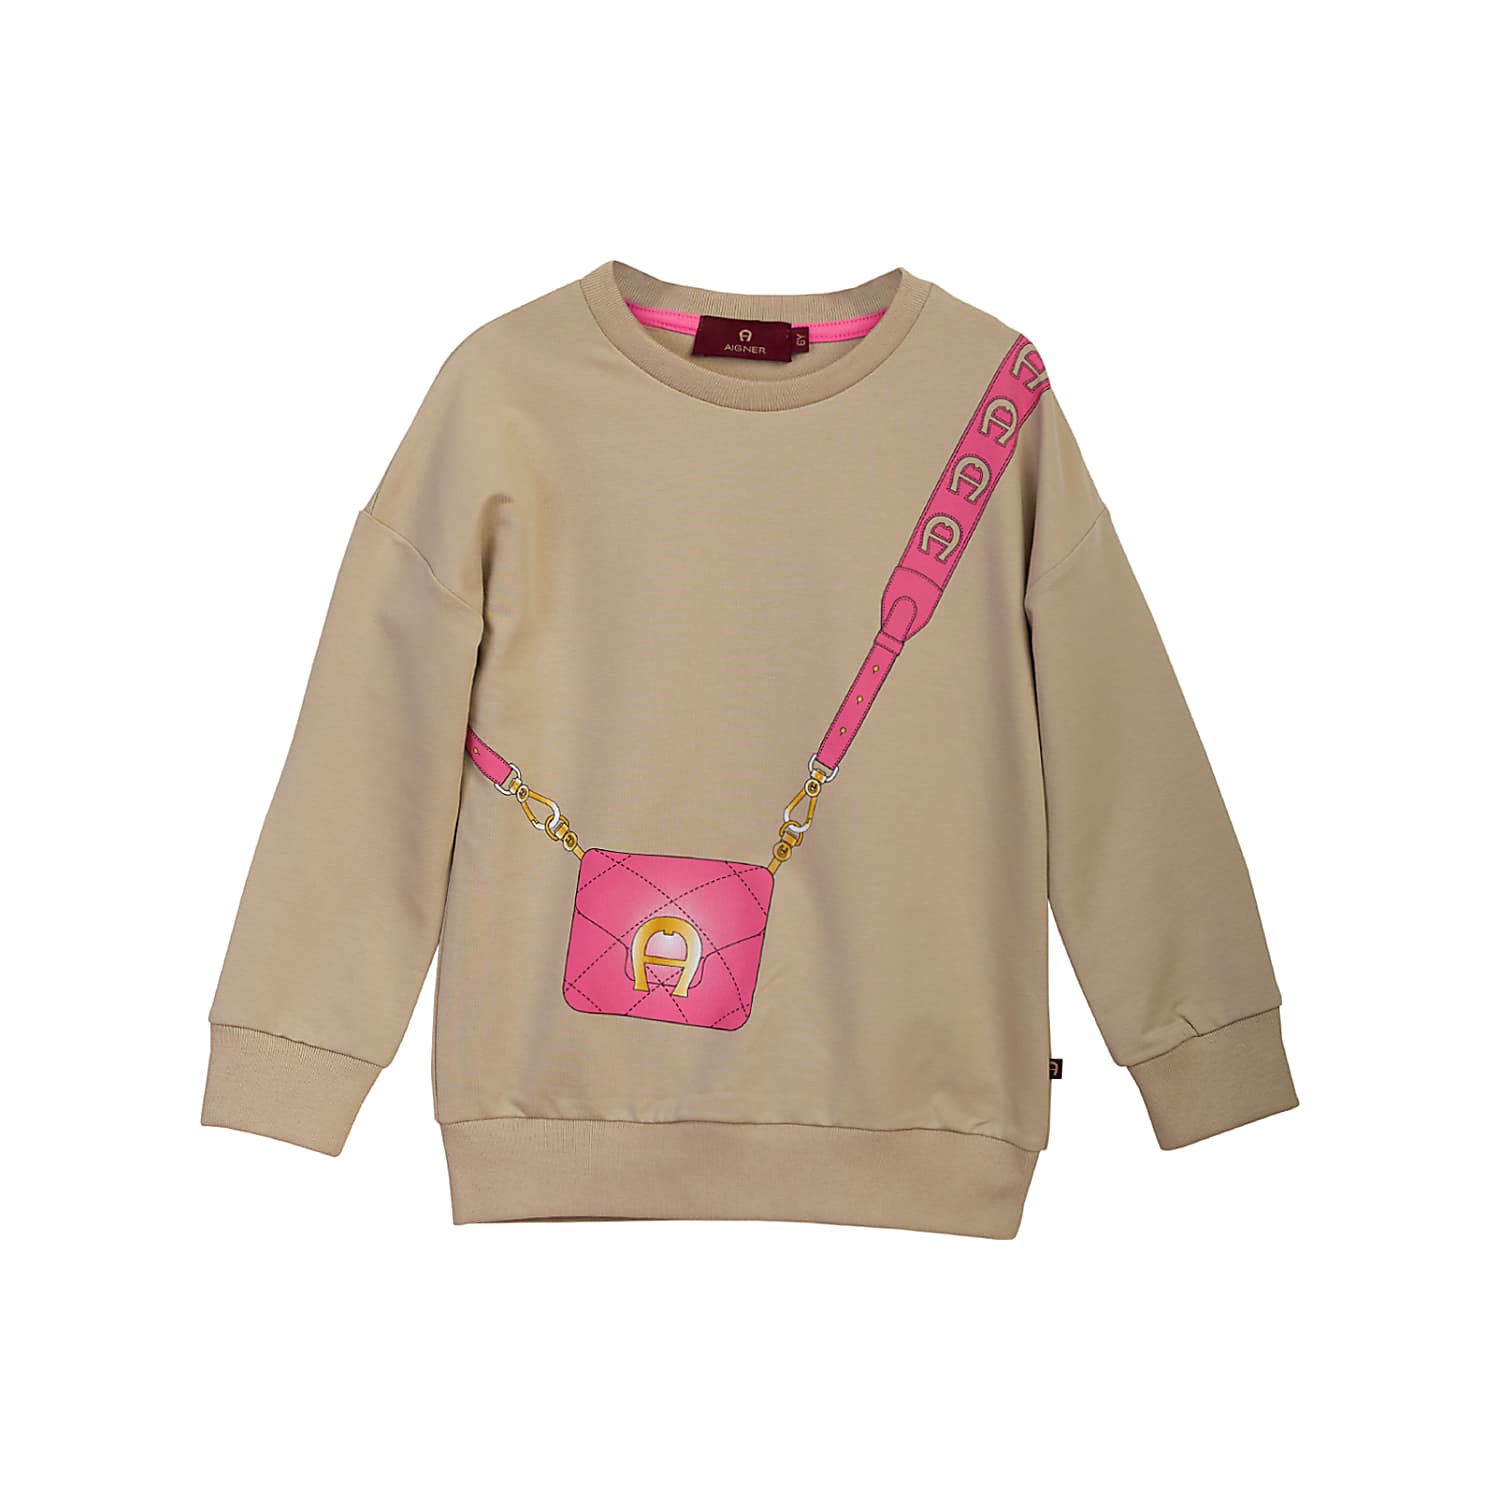 Girls sweater with print